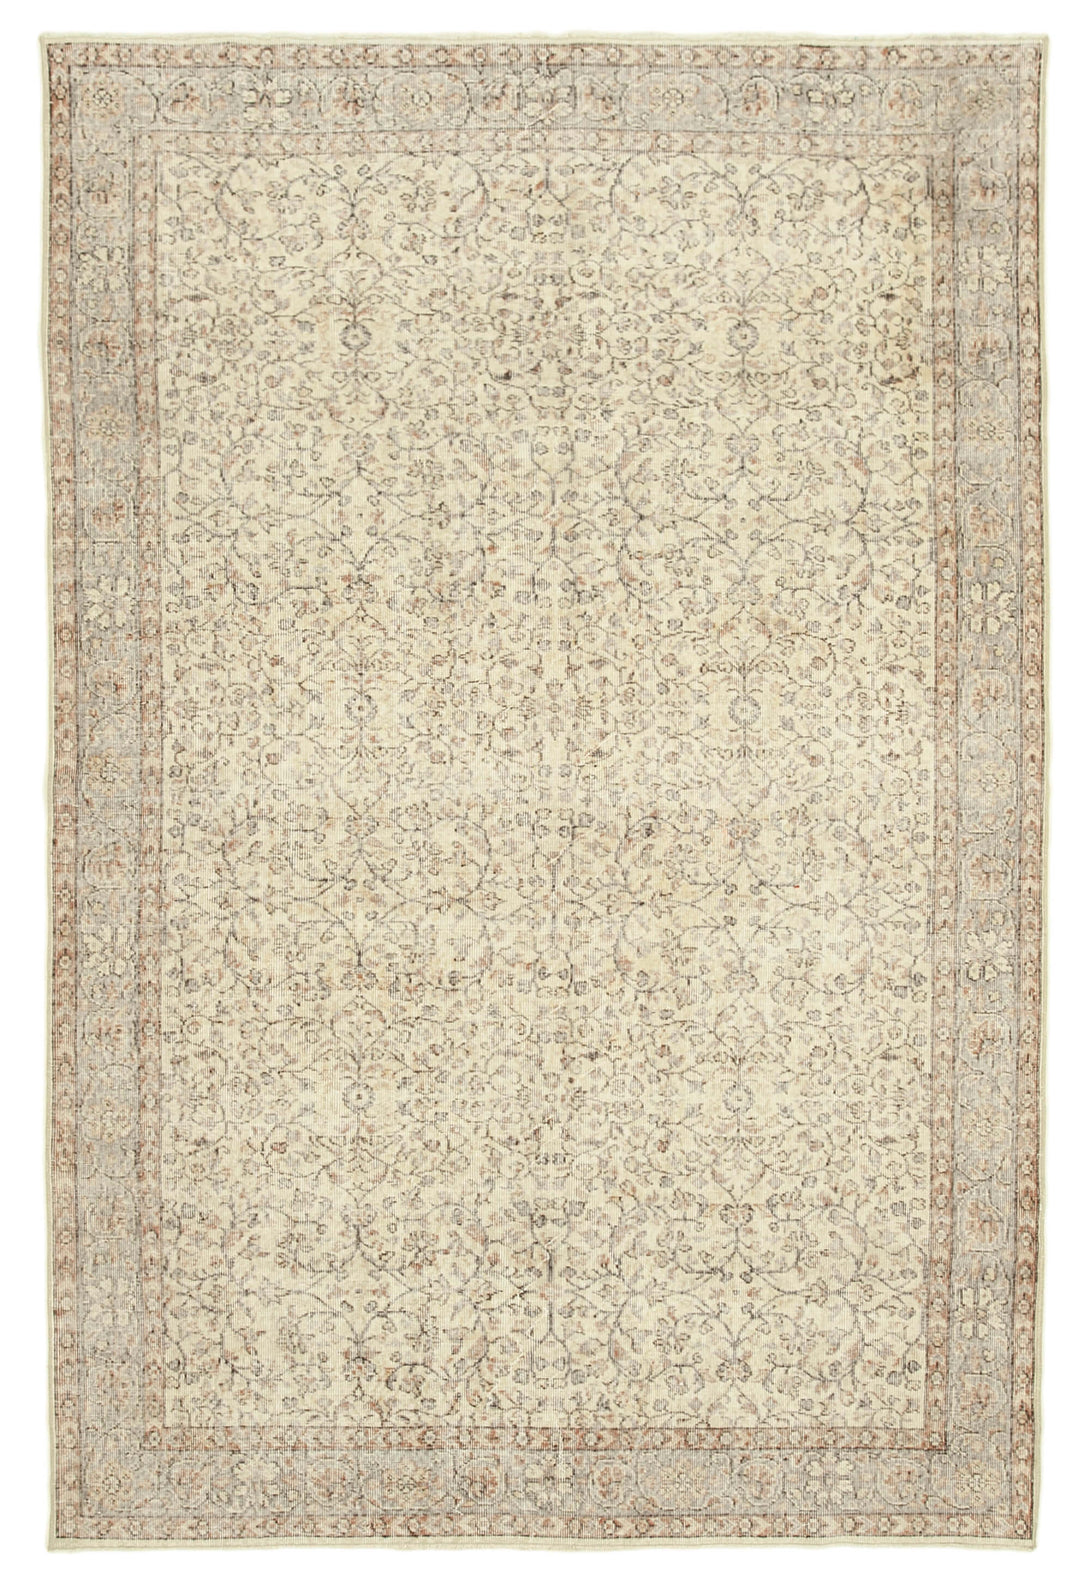 Handmade White Wash Area Rug > Design# OL-AC-38843 > Size: 6'-11" x 10'-4", Carpet Culture Rugs, Handmade Rugs, NYC Rugs, New Rugs, Shop Rugs, Rug Store, Outlet Rugs, SoHo Rugs, Rugs in USA